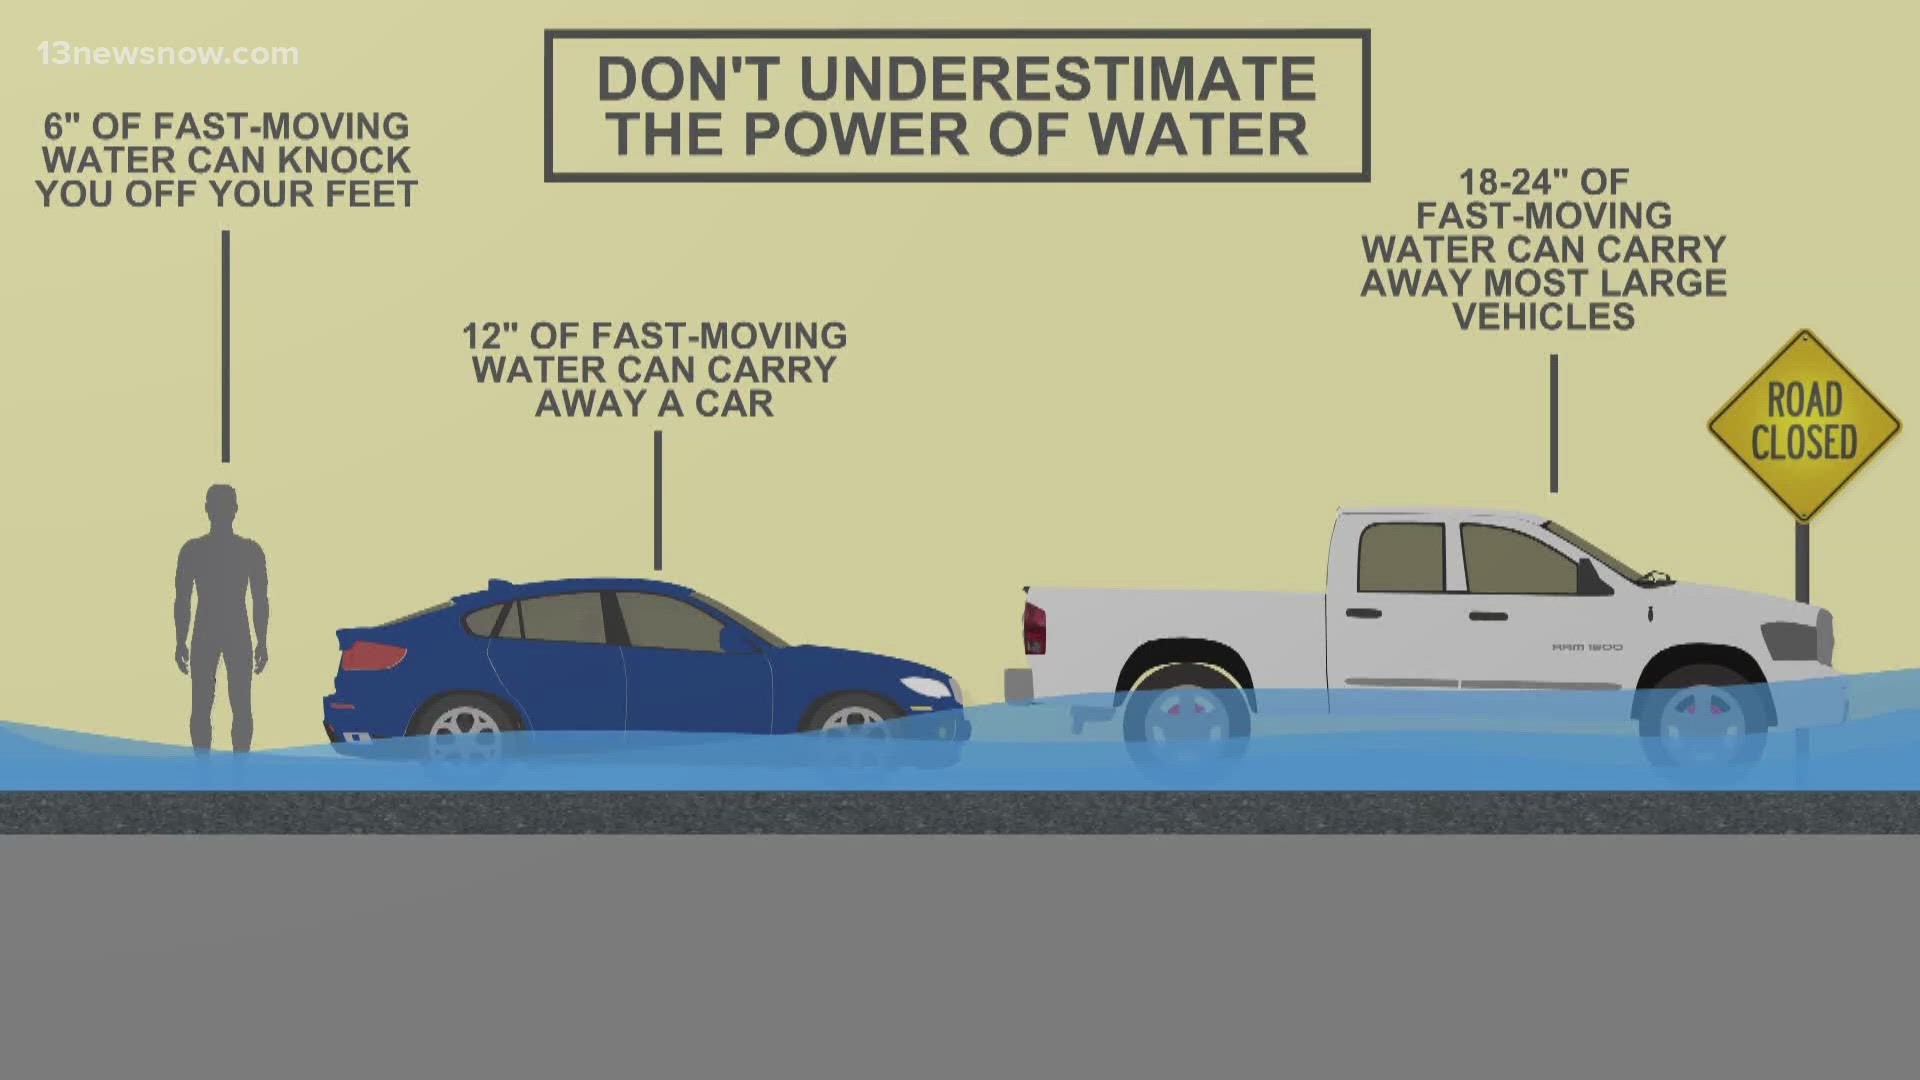 Here are tips on what to do if you find yourself near flood waters.